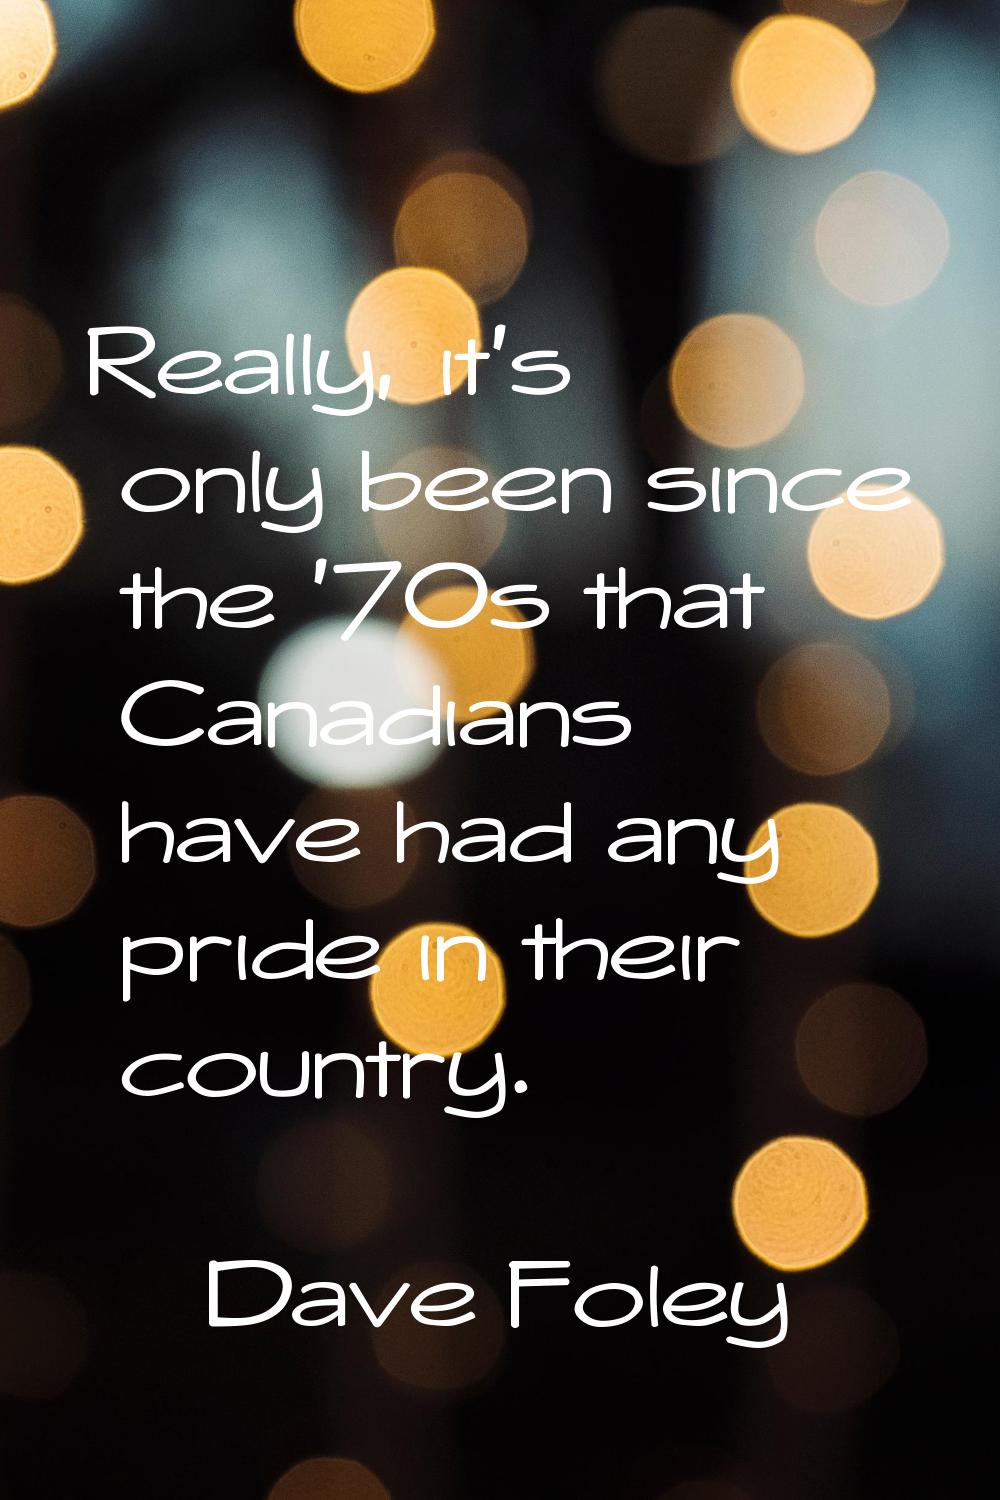 Really, it's only been since the '70s that Canadians have had any pride in their country.